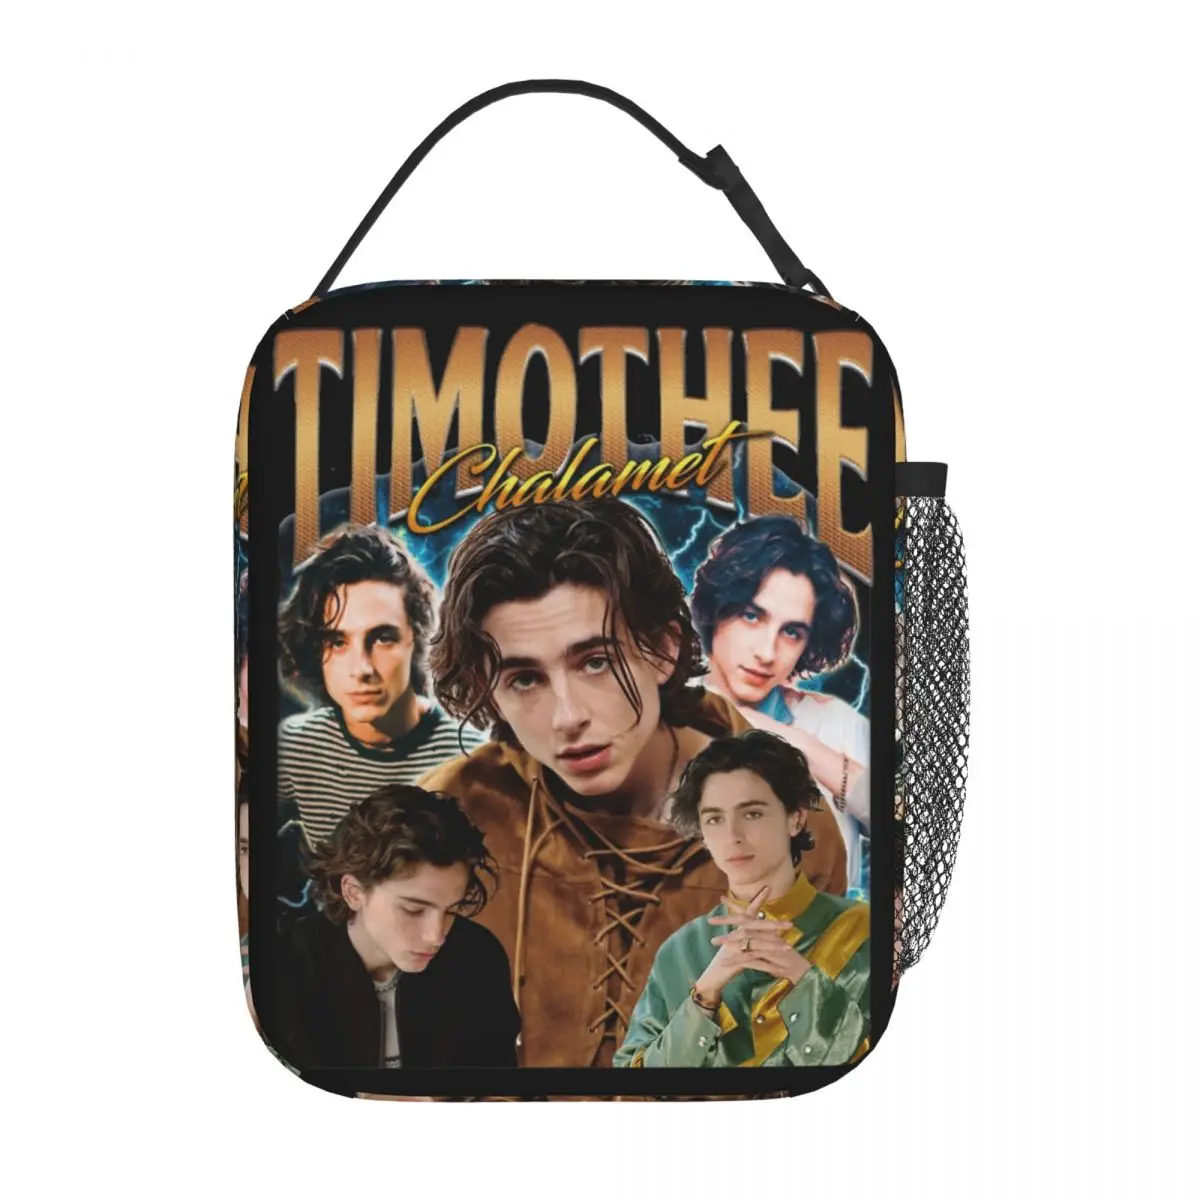 

Retro Timothee Chalamet Product Insulated Lunch Bag For Outdoor Food Storage Bag Portable Thermal Cooler Lunch Boxes